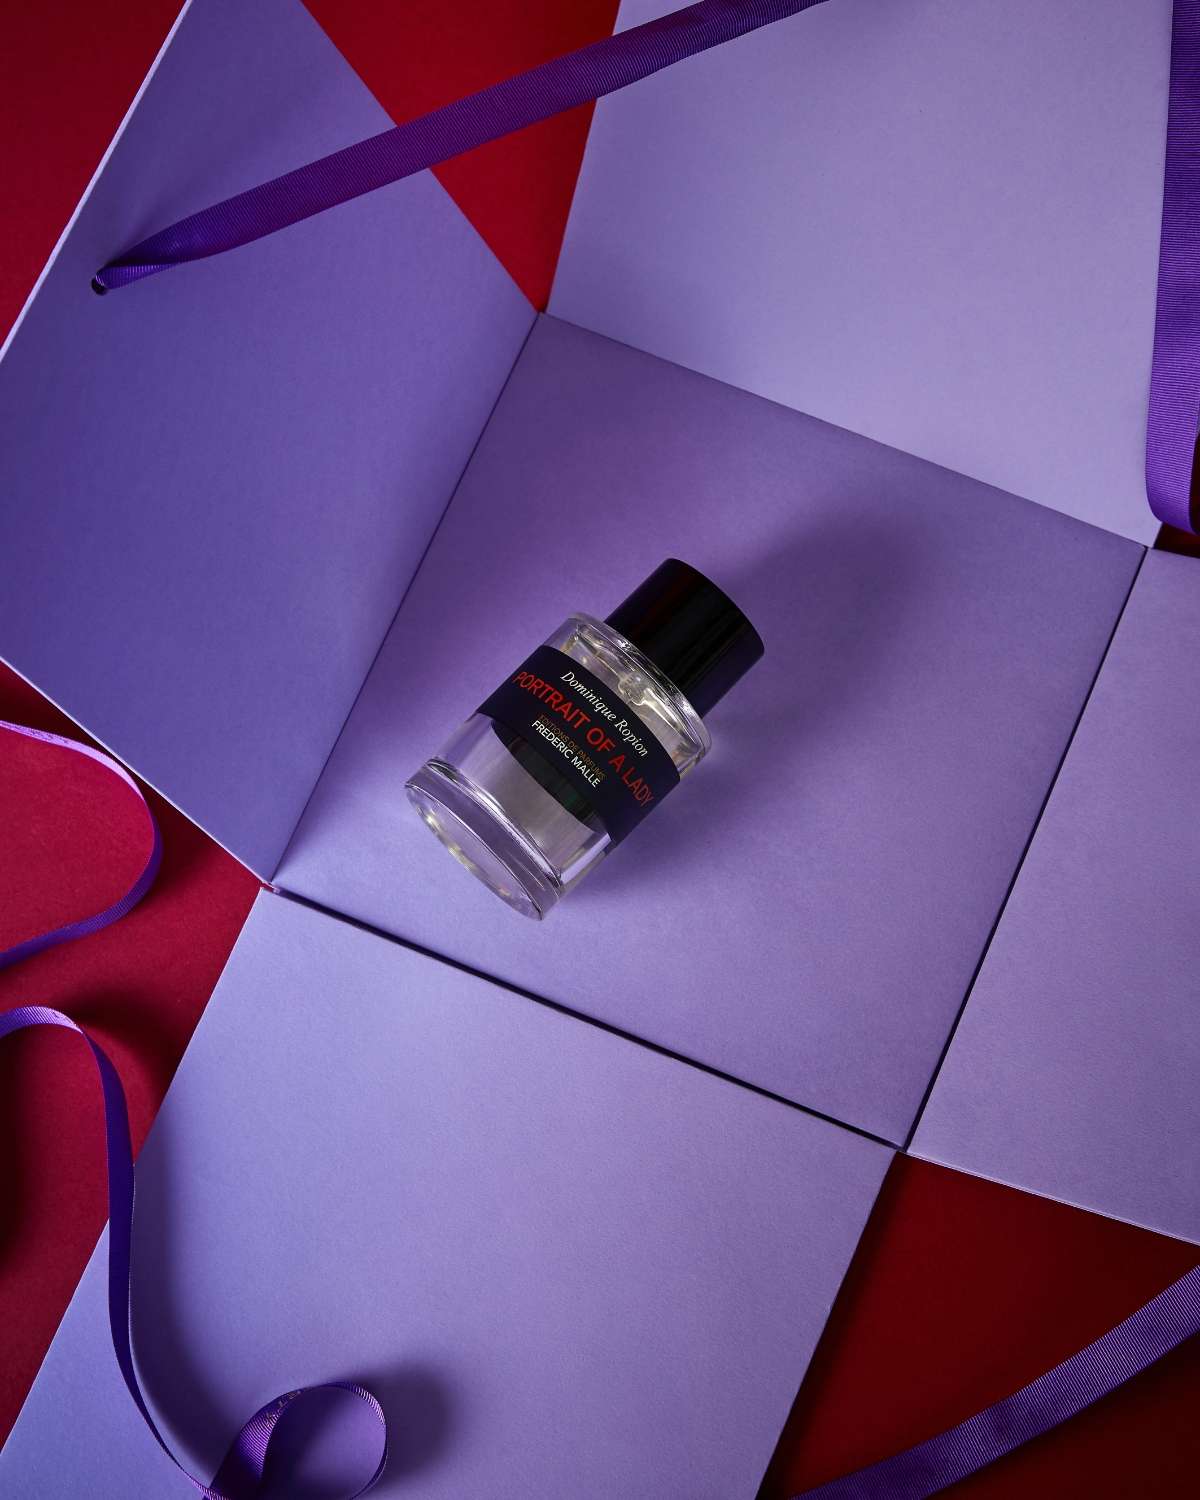 The Ultimate Perfume Gift Guide